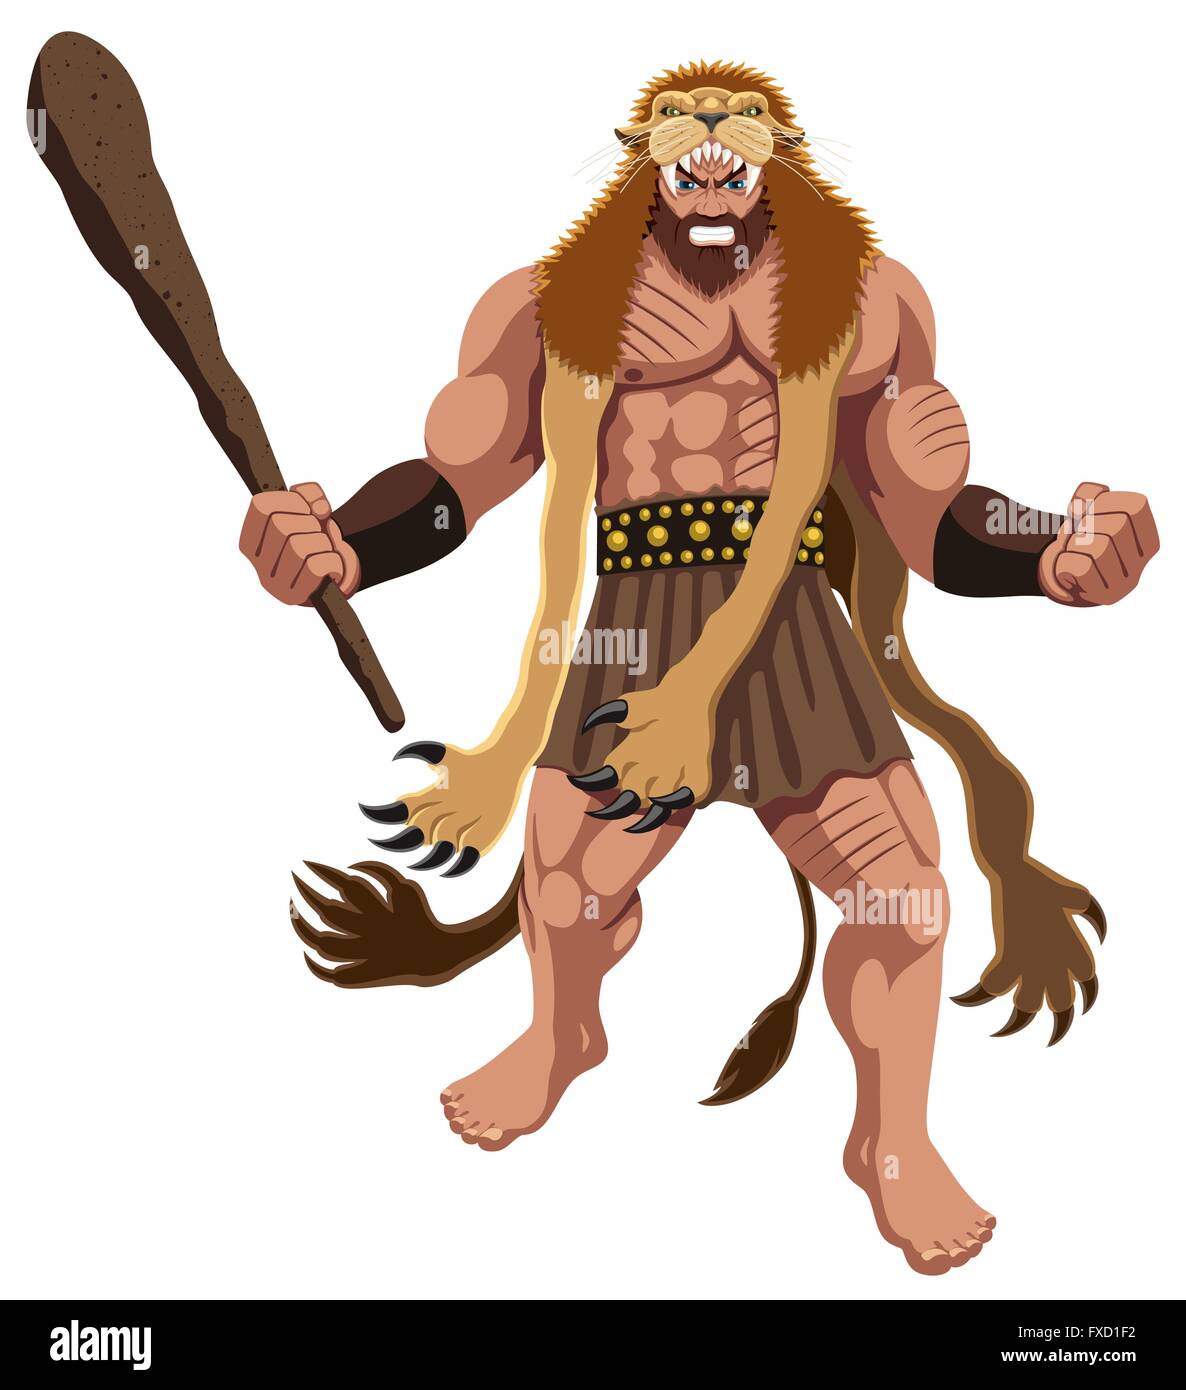 Heracles over white background. No transparency and gradients used. Stock Vector